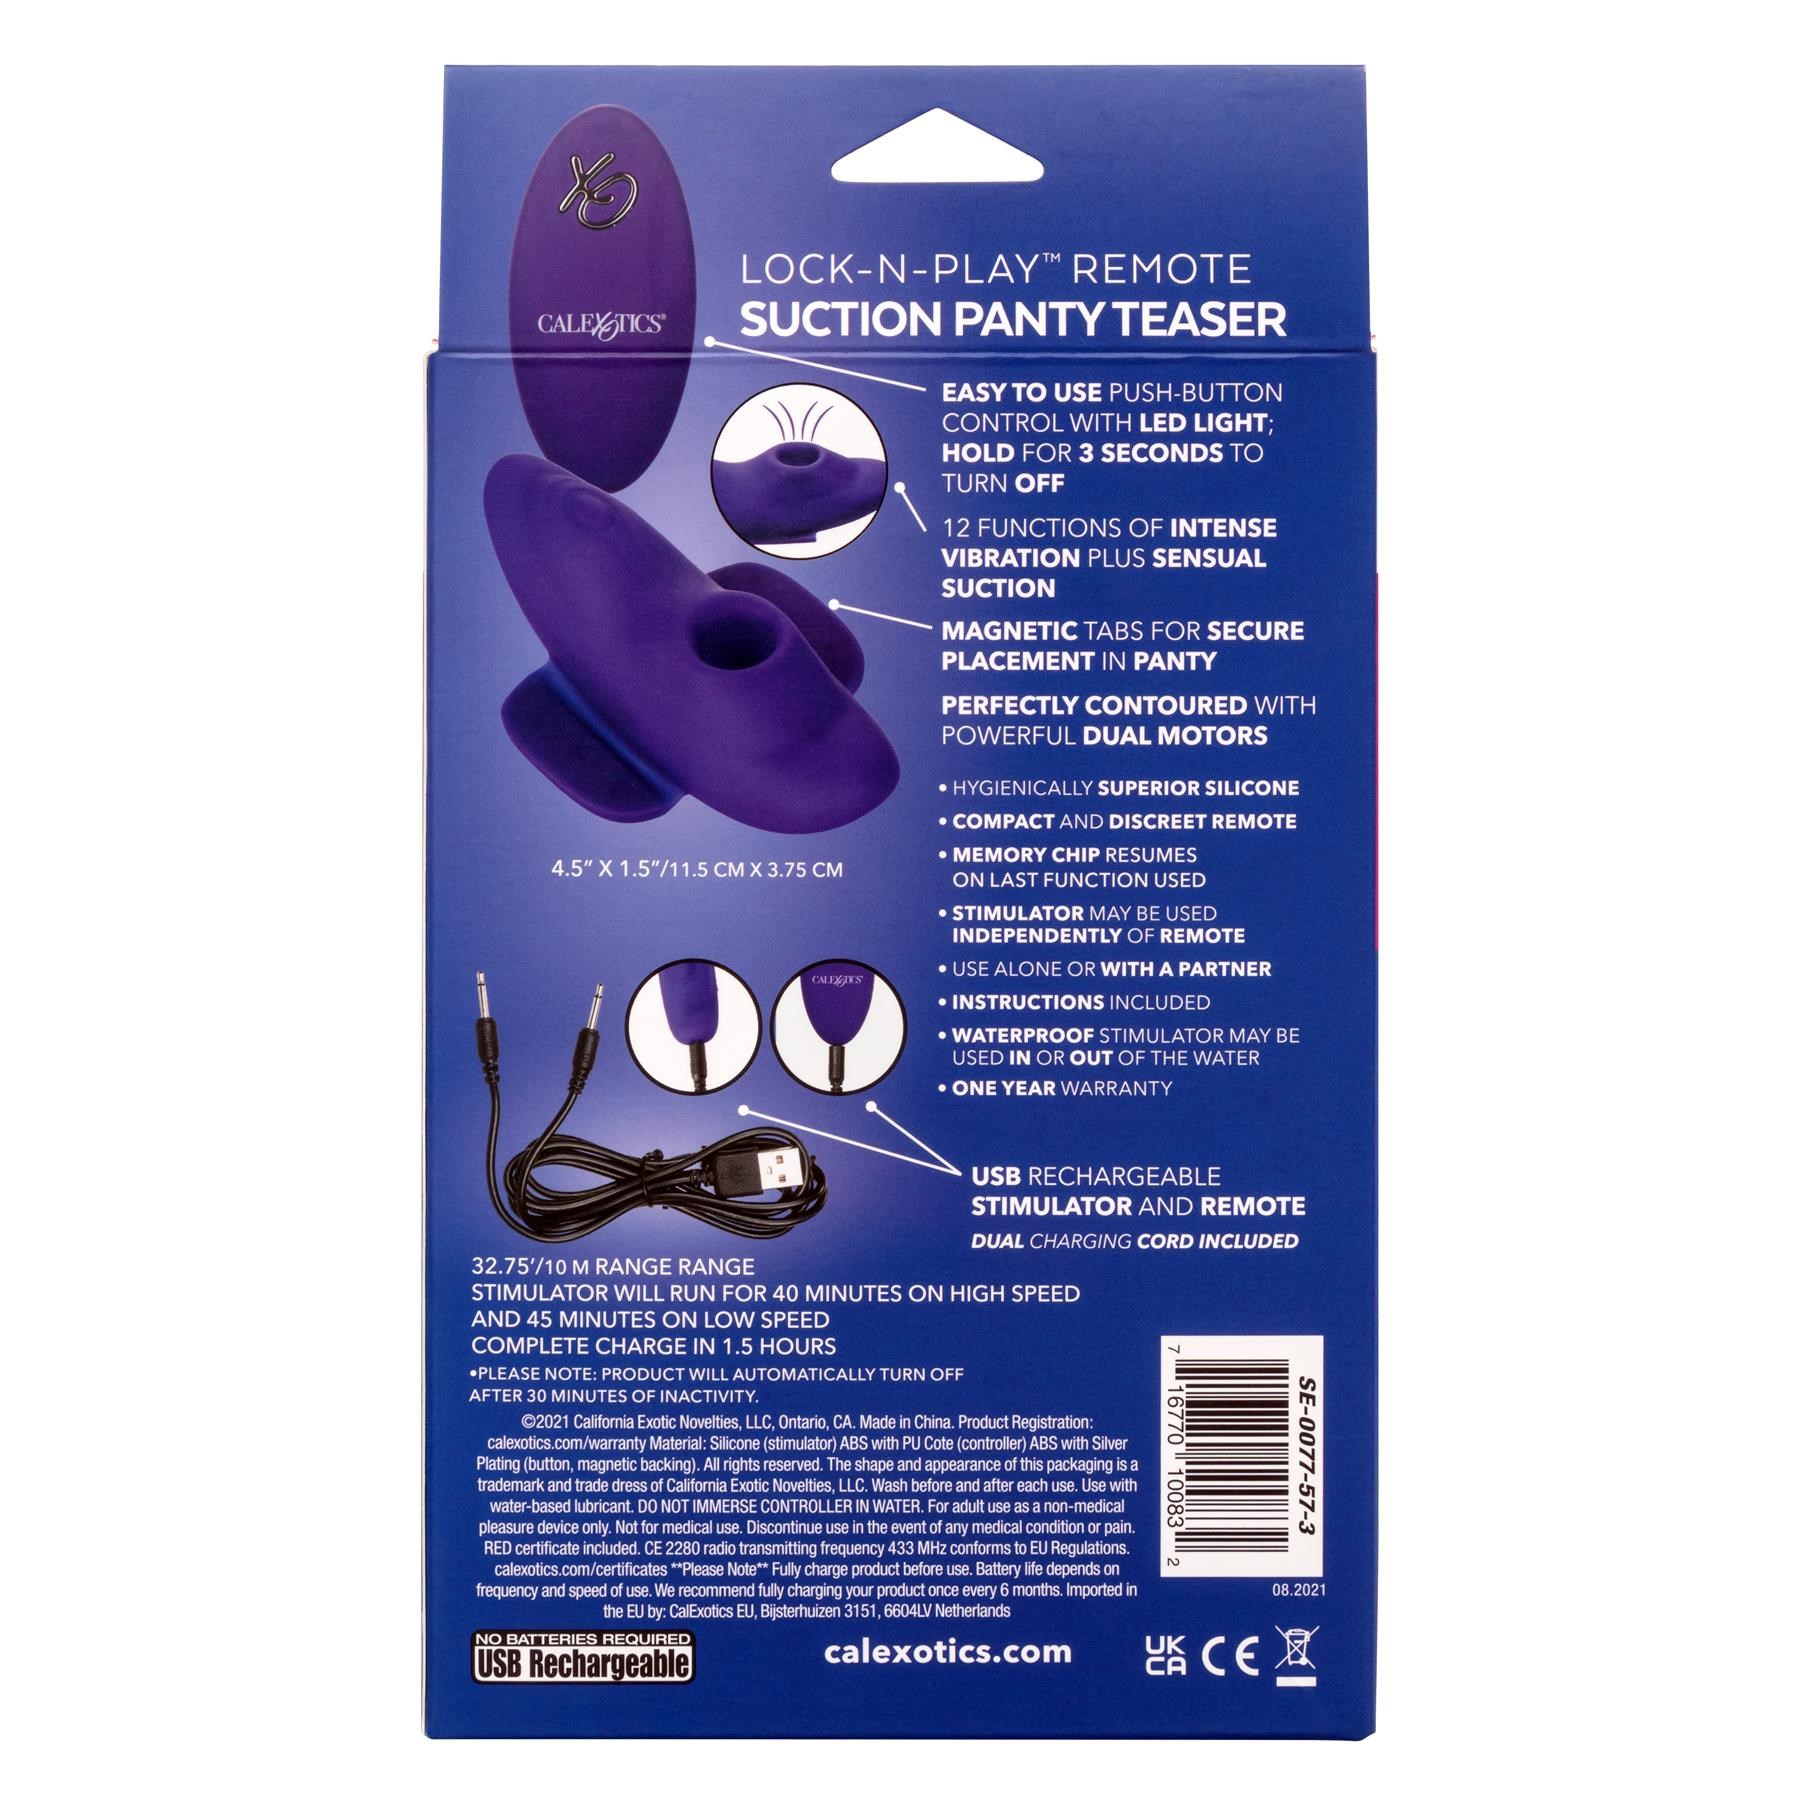 Lock-N-Play Remote Suction Panty Teaser - Packaging - Back